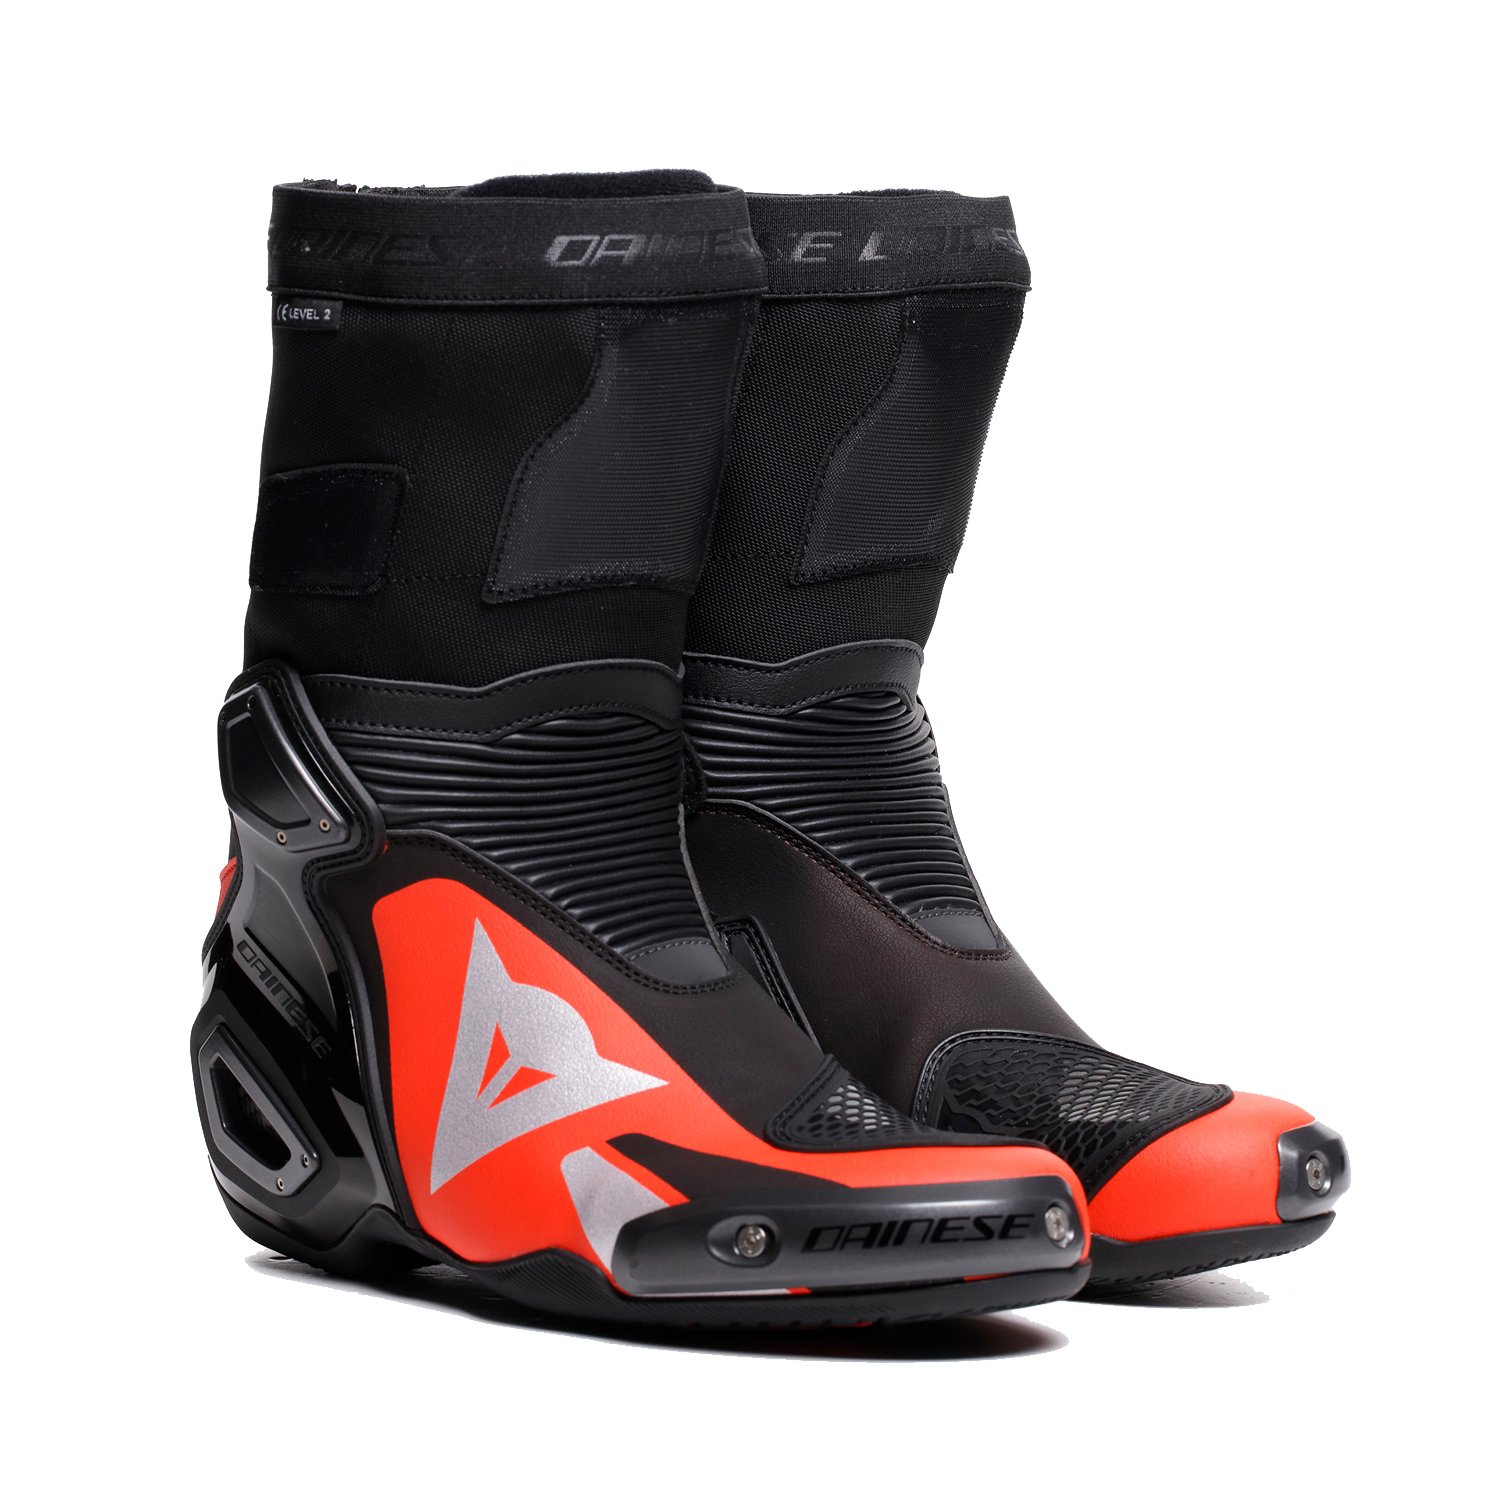 Image of Dainese Axial 2 Boots Black Red Fluo Talla 42